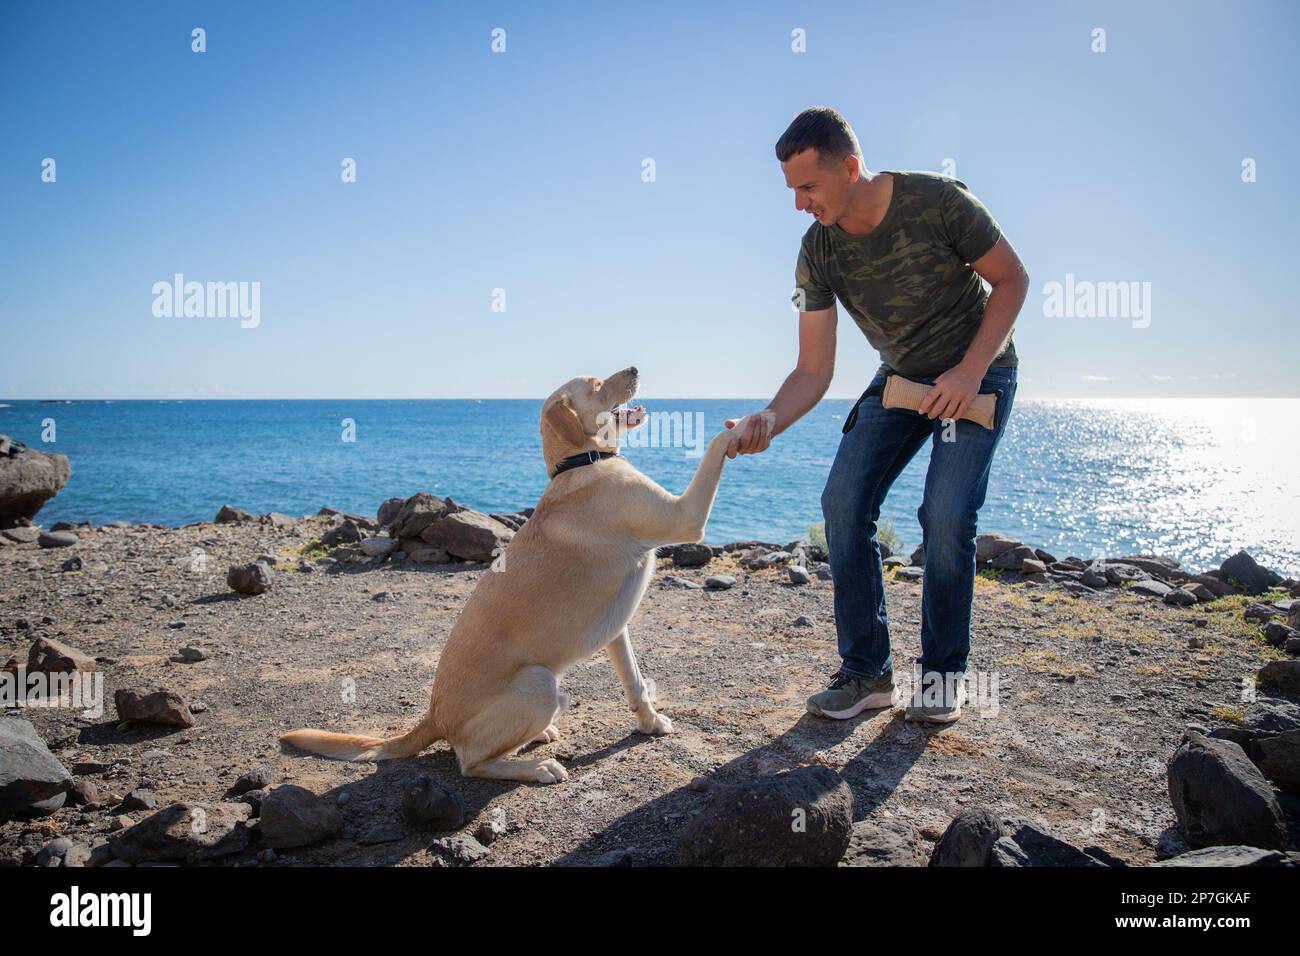 A dog trainer with a dog on the beach does training exercises and holds his paw. Stock Photo